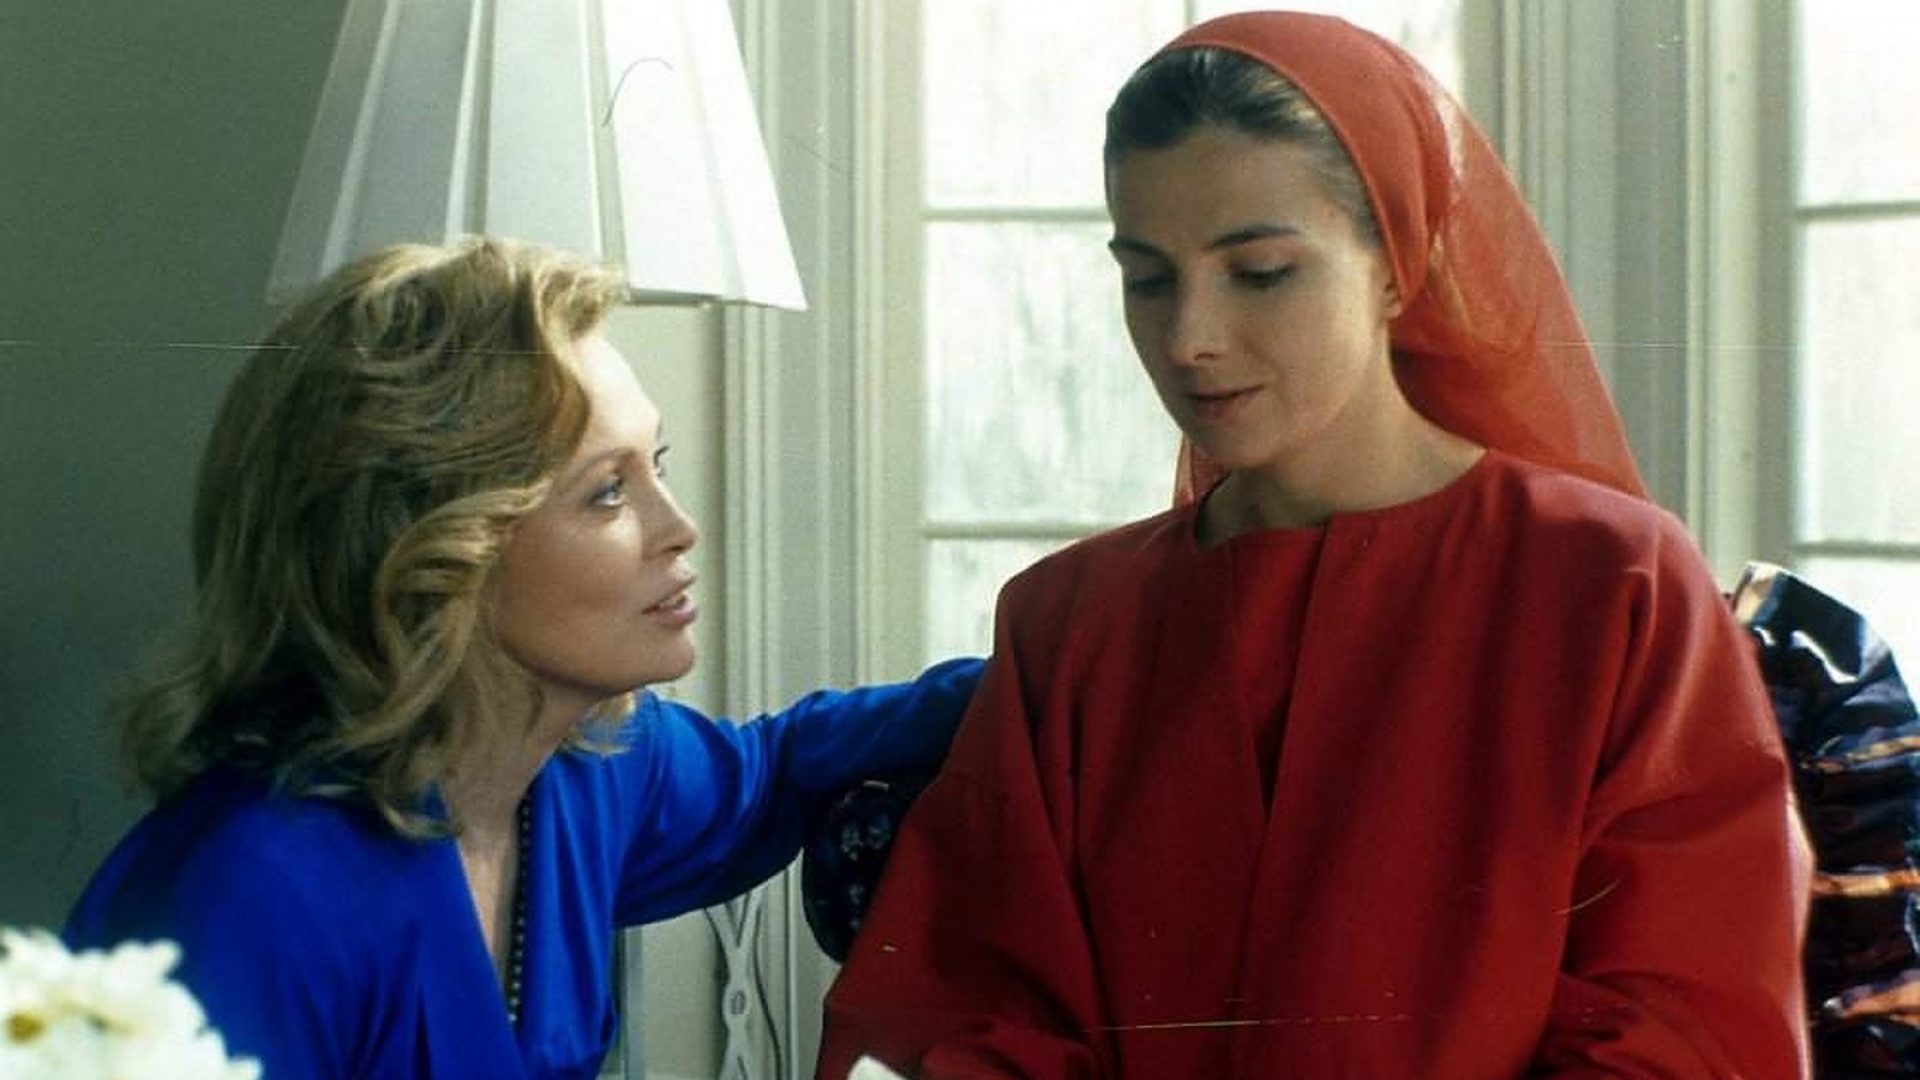 Film still from The Handmaid's Tale. Two women sit down together talking, one dresses in blue the other dressed in red.